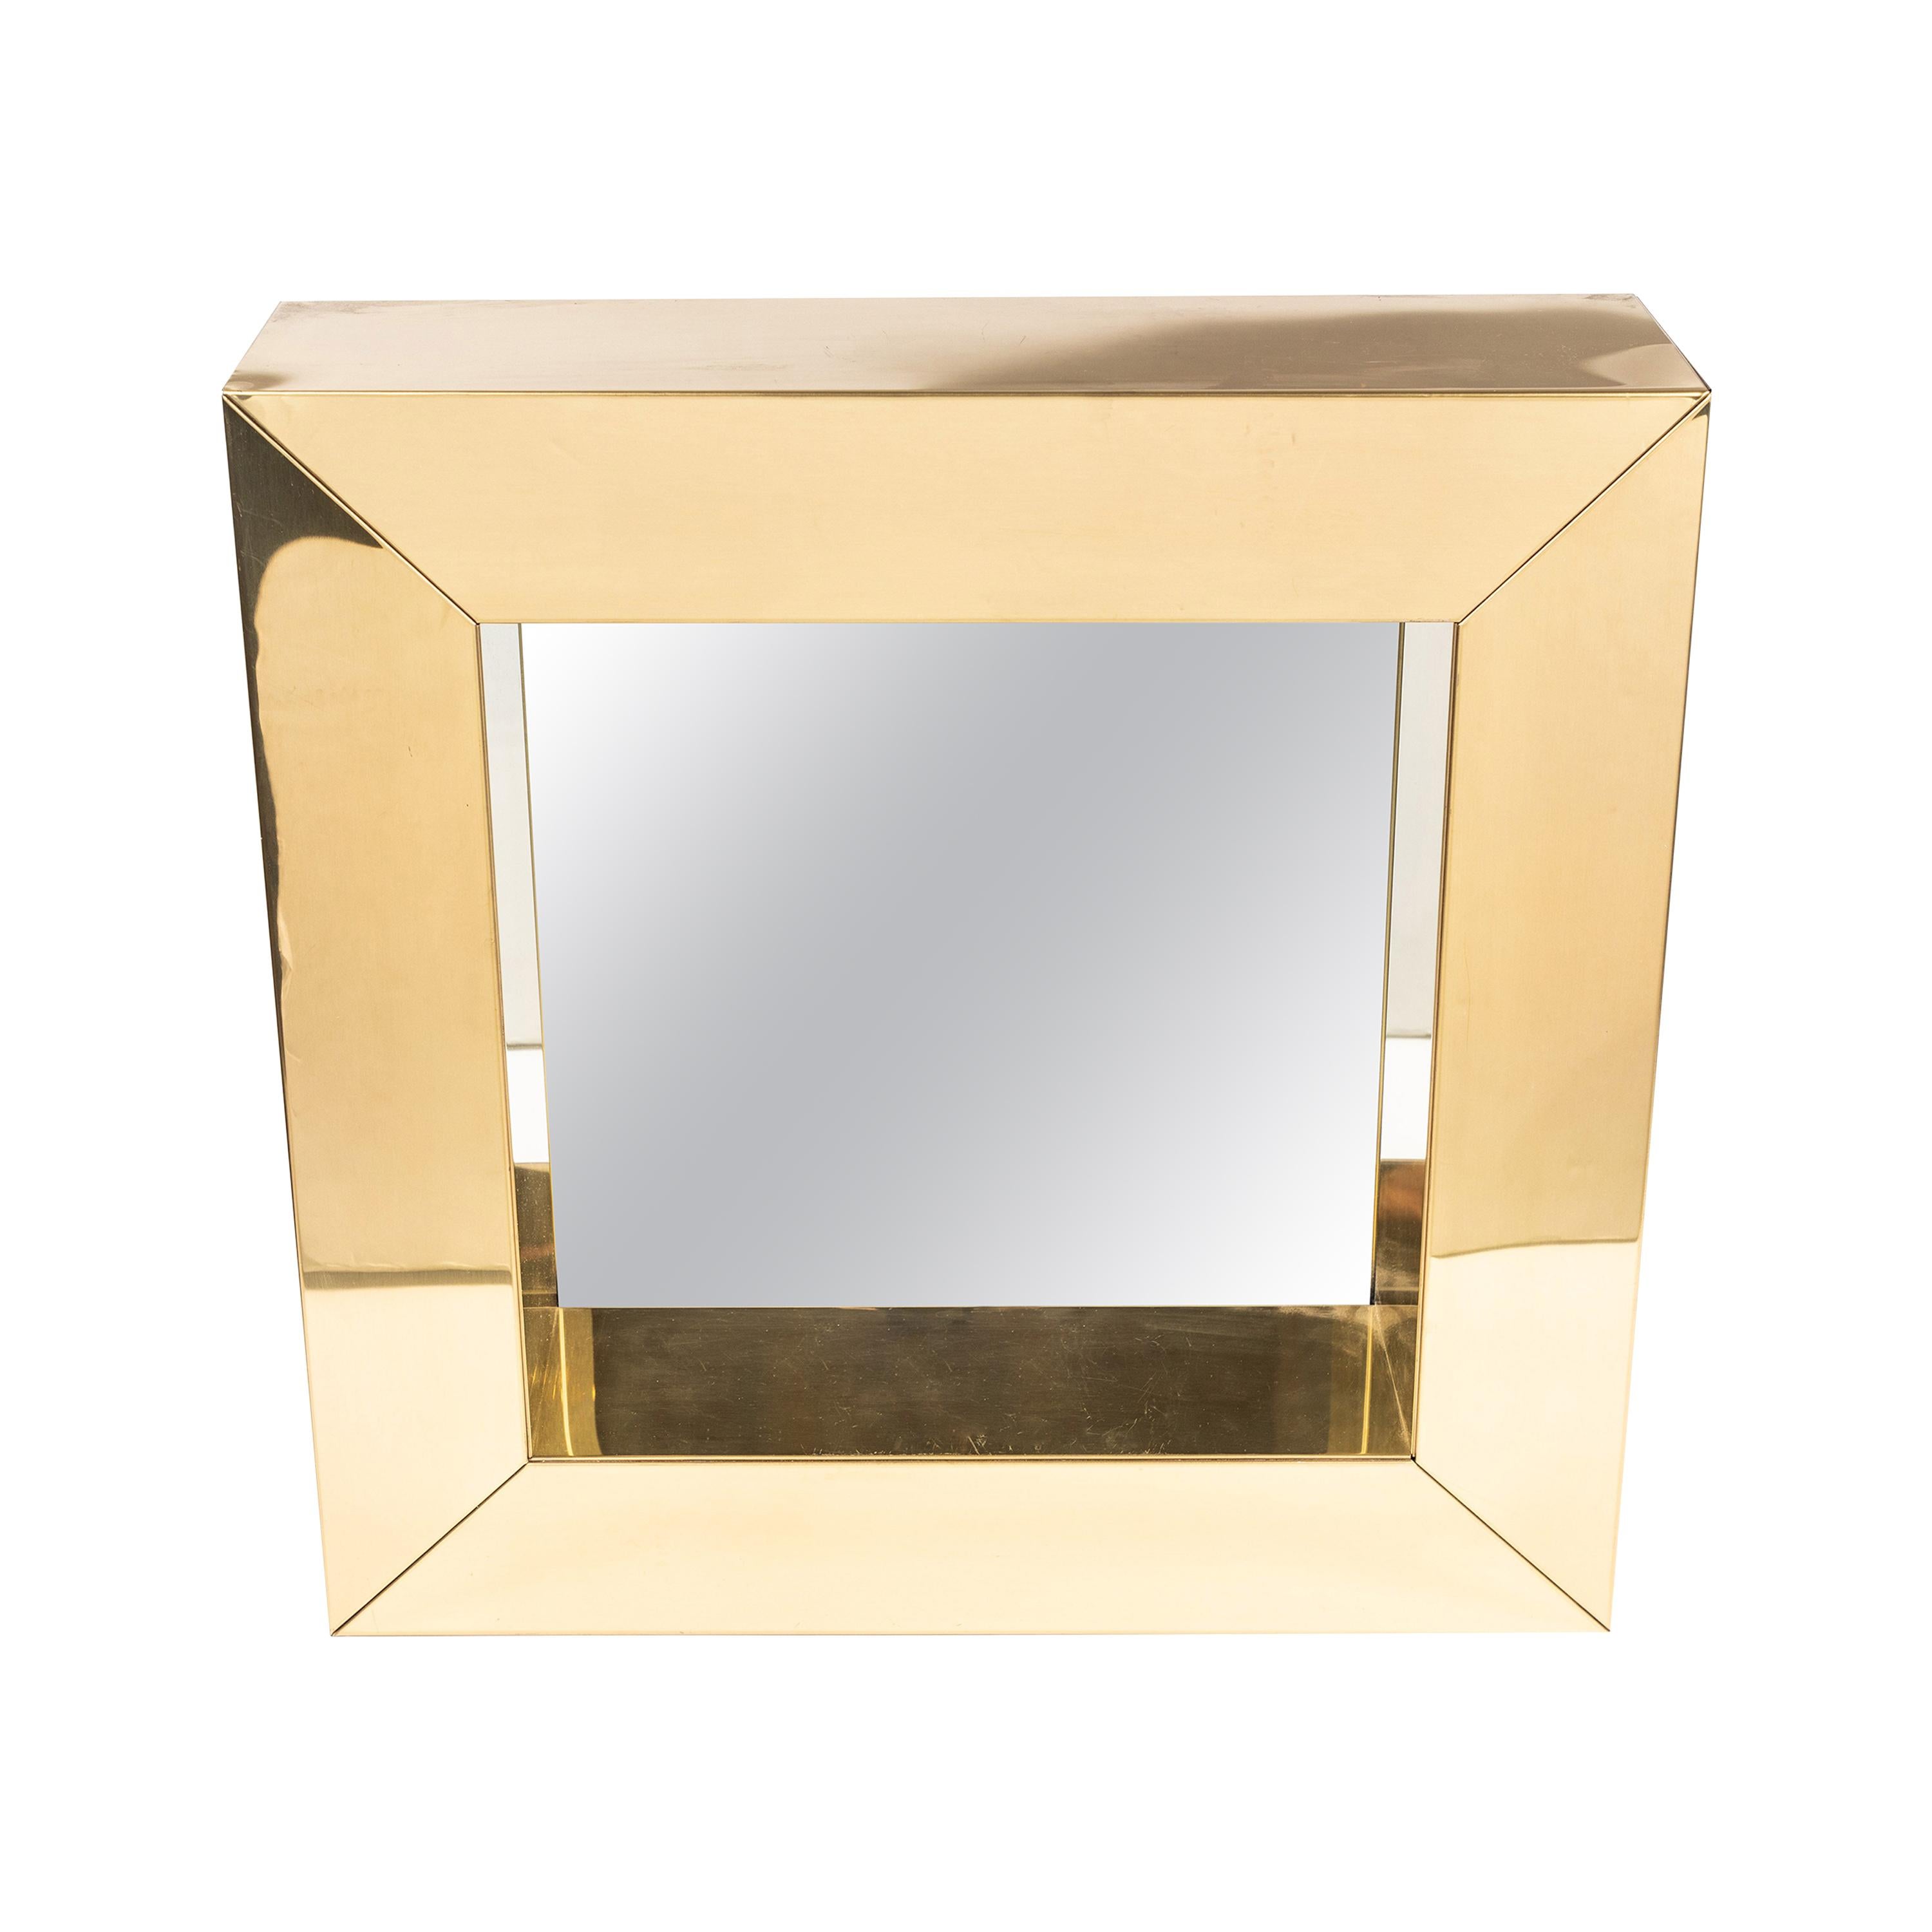 Square Polished Brass Mirror by Curtis Jere, 1976